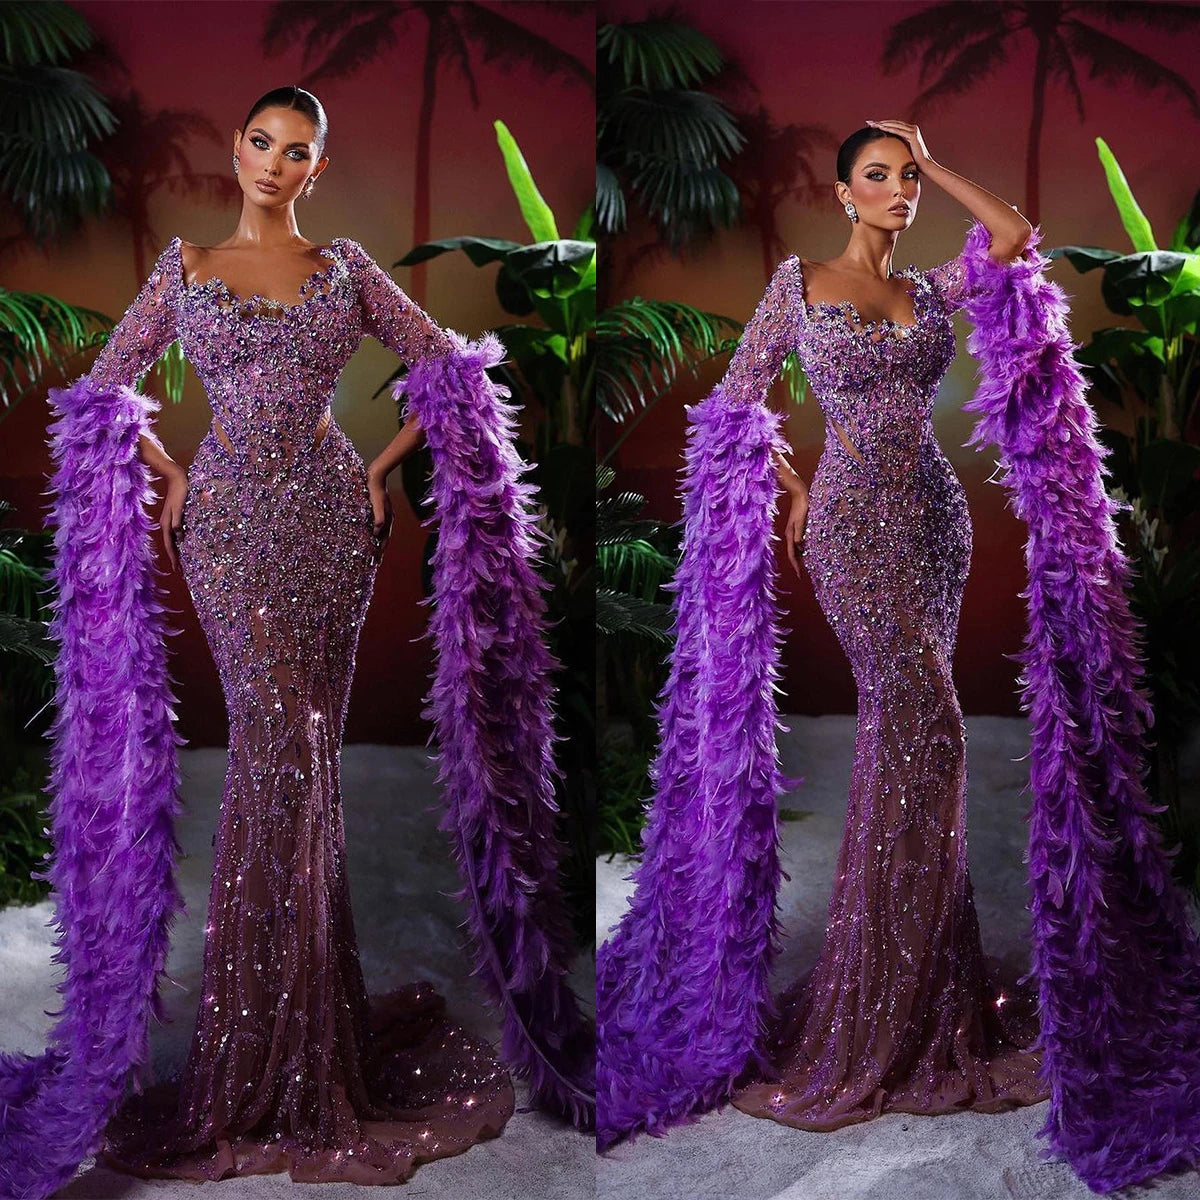 Mermaid Square Neck Long Feather Sleeve Sequin Prom Dress